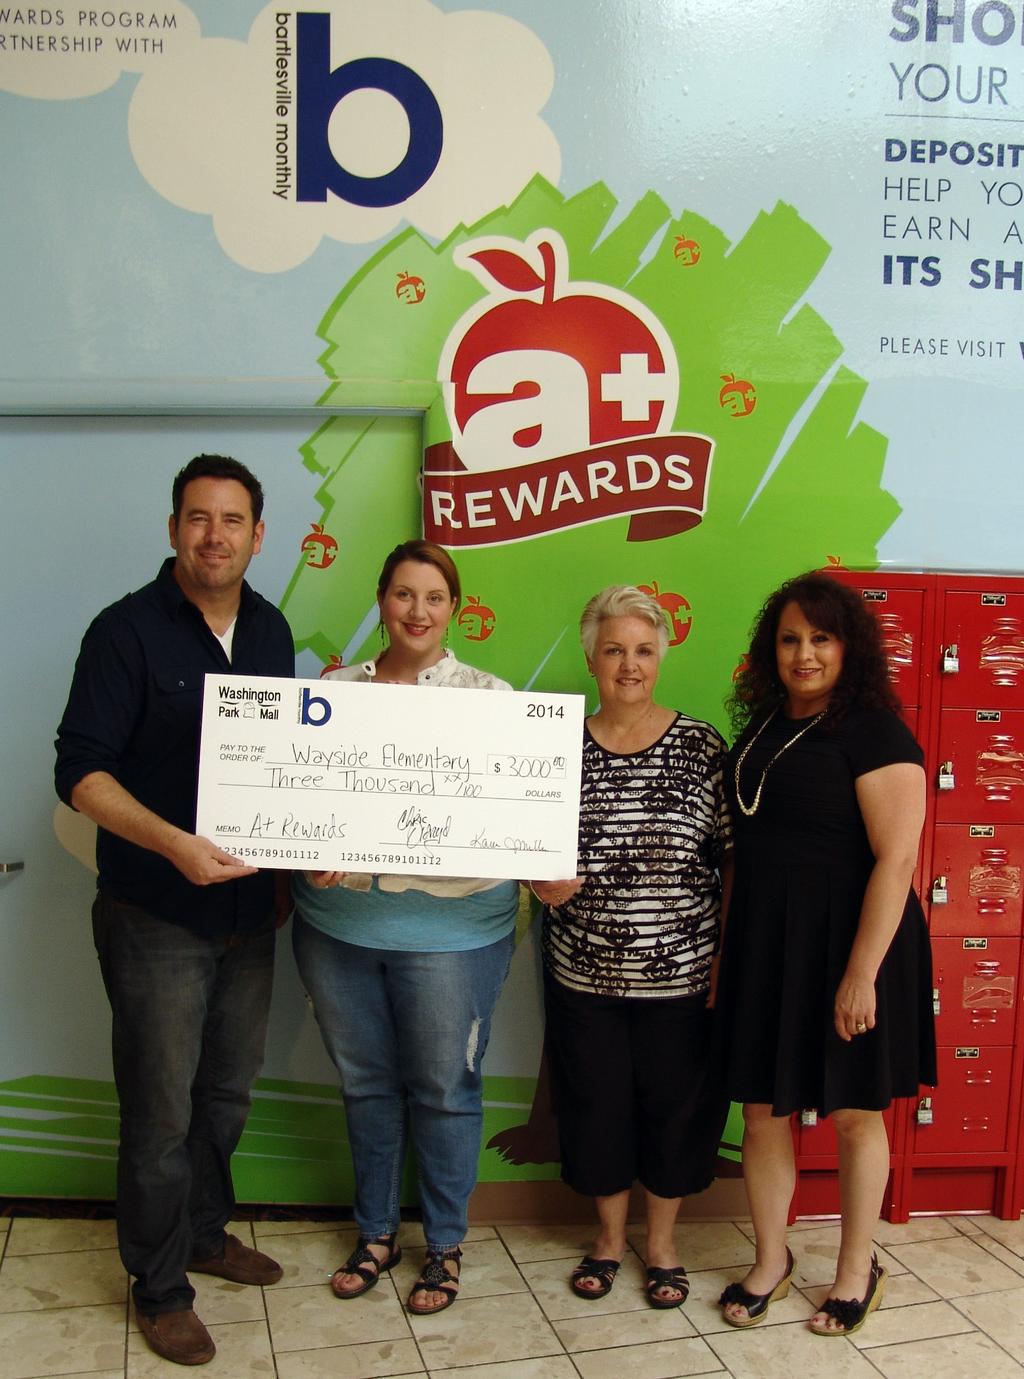 Hoover and Wayside awarded money through A+ Rewards Program Bartlesville Monthly Magazine and Washington Park Mall partnered to create the A+ Rewards program to encourage shopping locally at